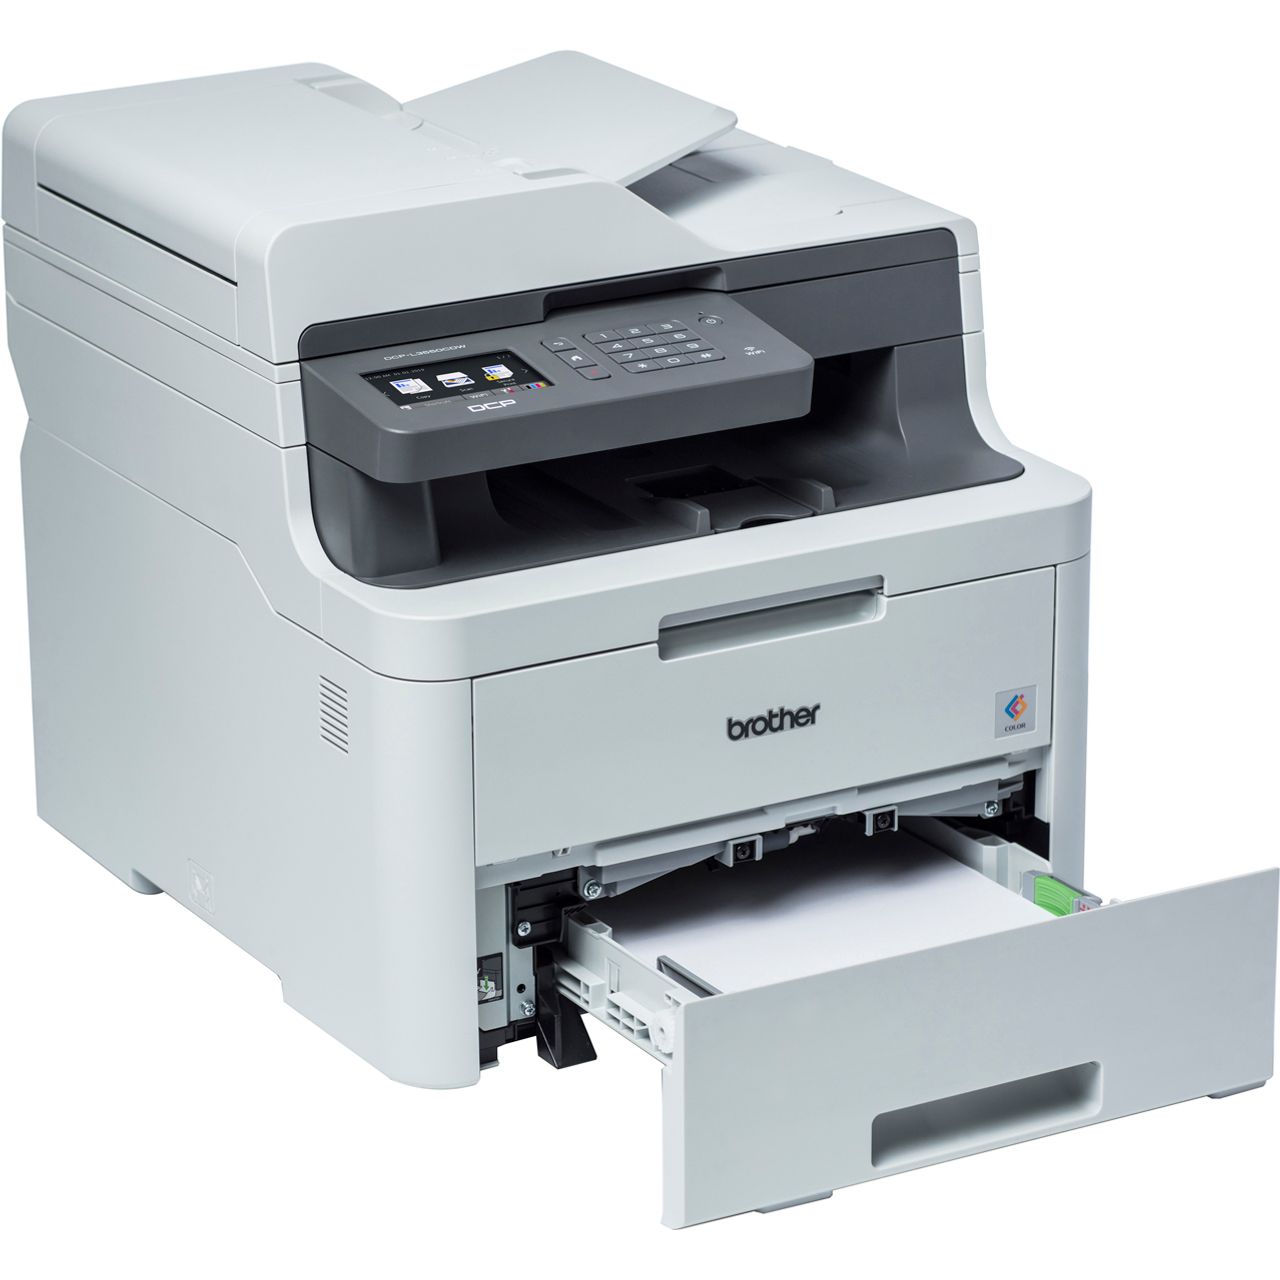 Styring Underholdning nummer DCP-L3550CDW | Brother 3-in-1 Colour Laser Printer | ao.com